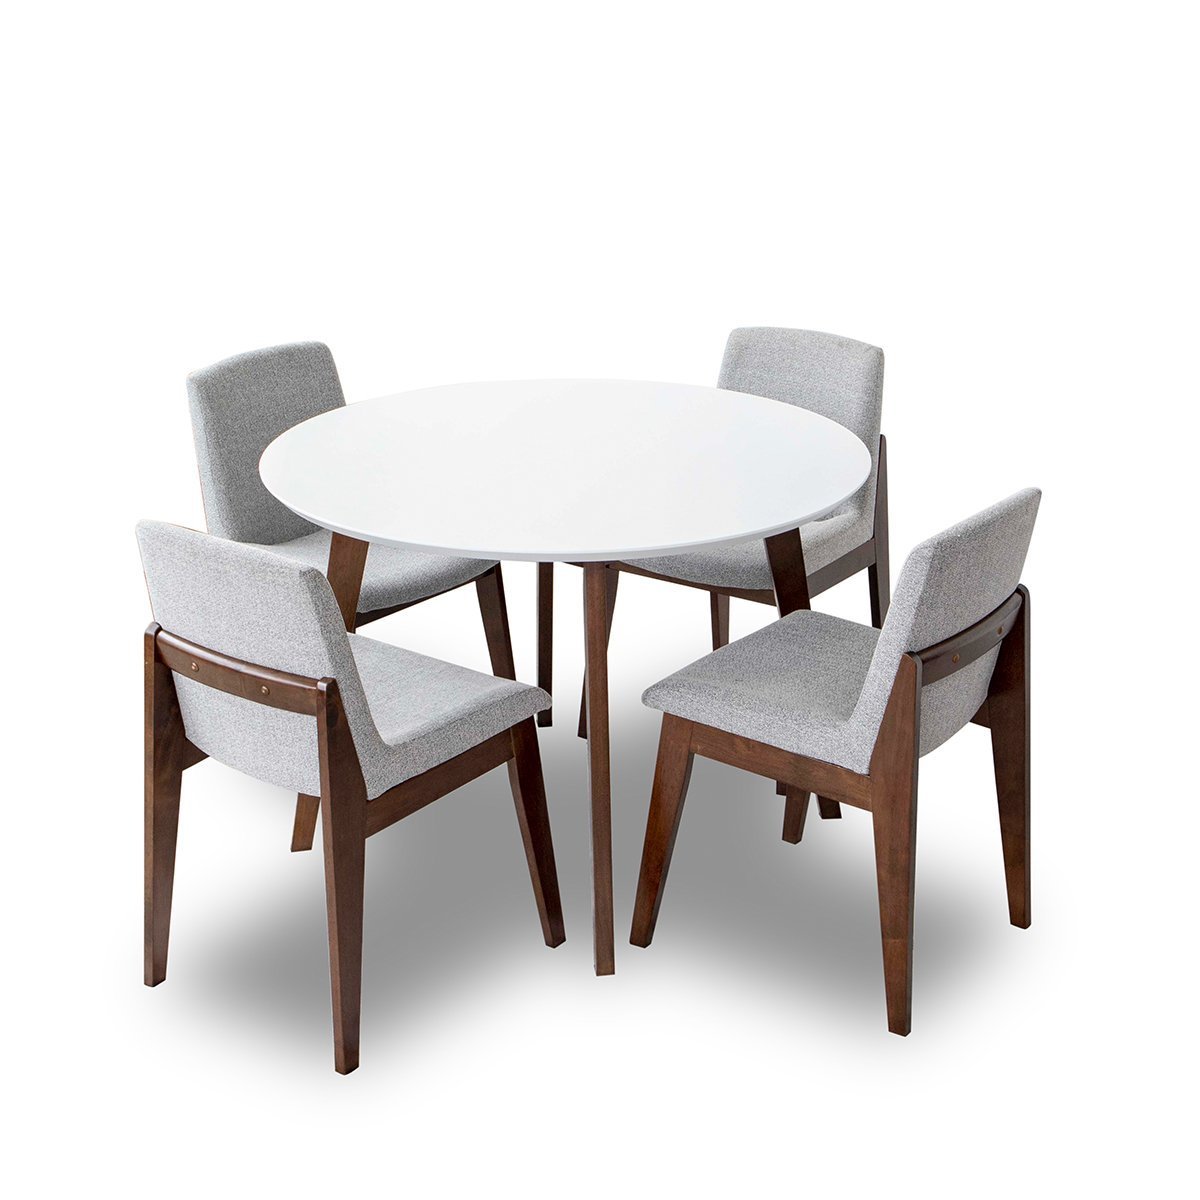 Aliana Dining set with  Light Gray Chairs  | Mid in Mod | Houston TX | Best Furniture stores in Houston